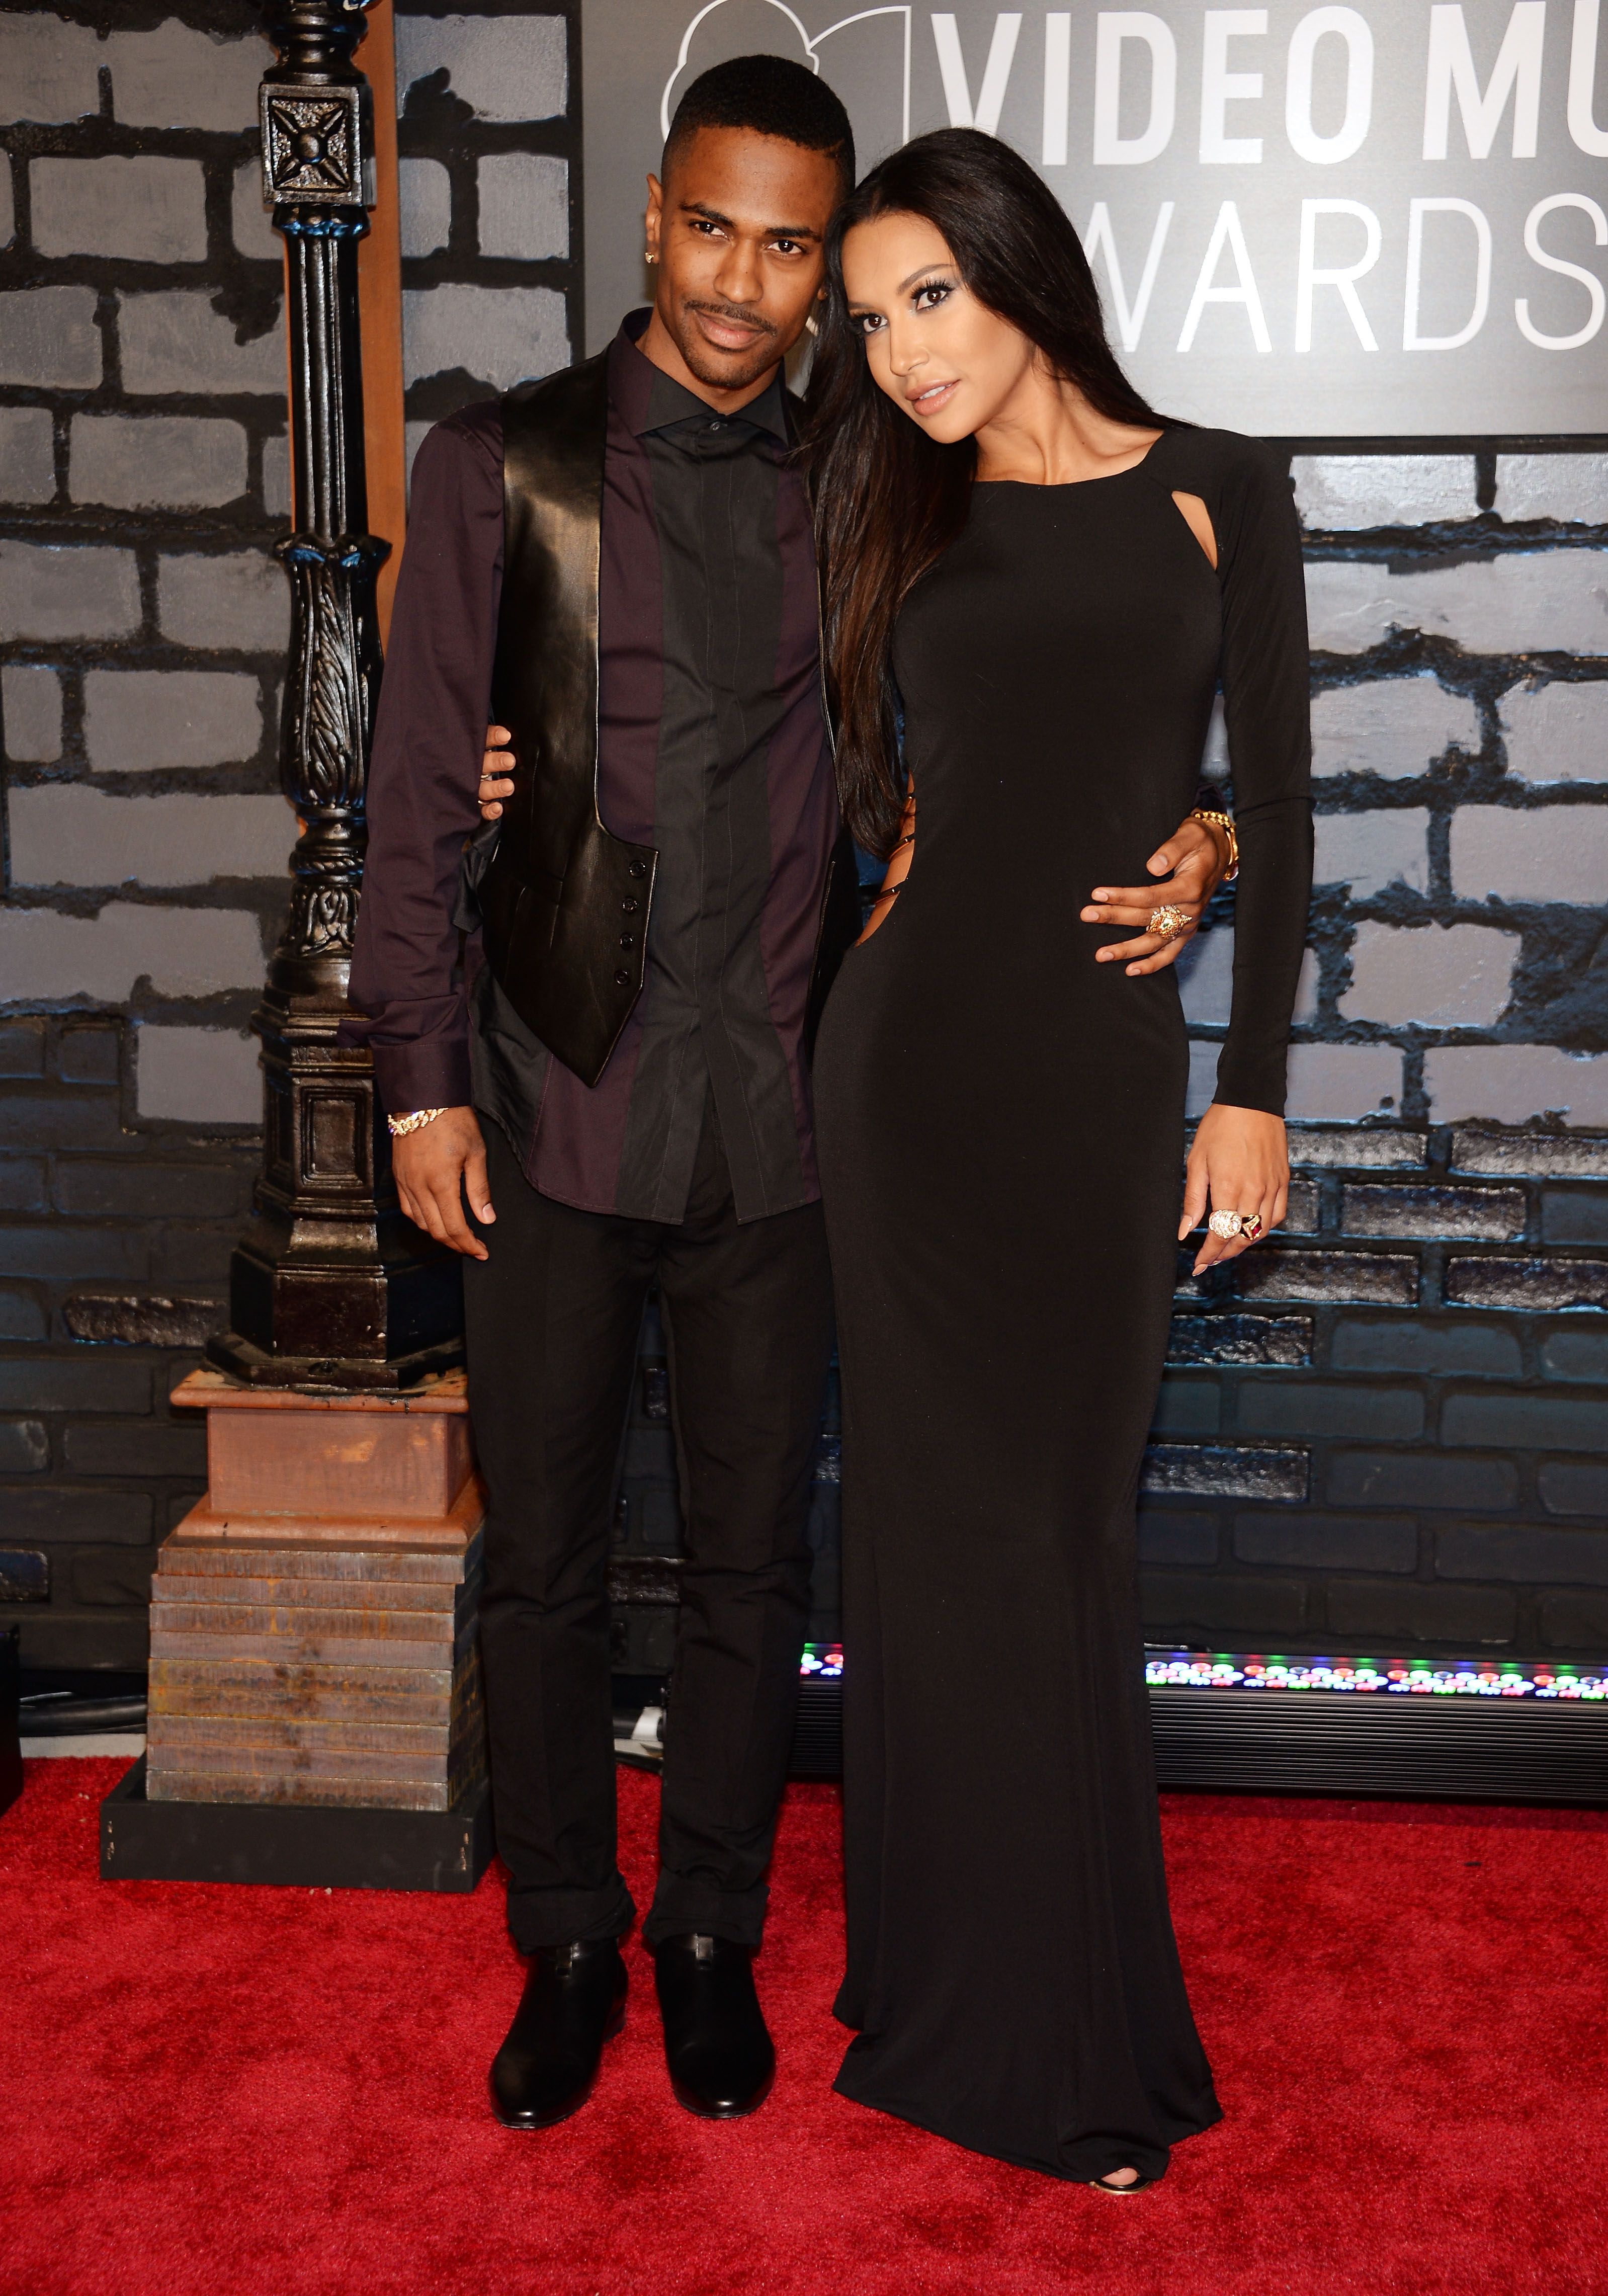 Big Sean and Naya Rivera at the MTV Video Music Awards at the Barclays Center on August 25, 2013, in the Brooklyn borough of New York City | Photo: Dimitrios Kambouris/WireImage/Getty Images